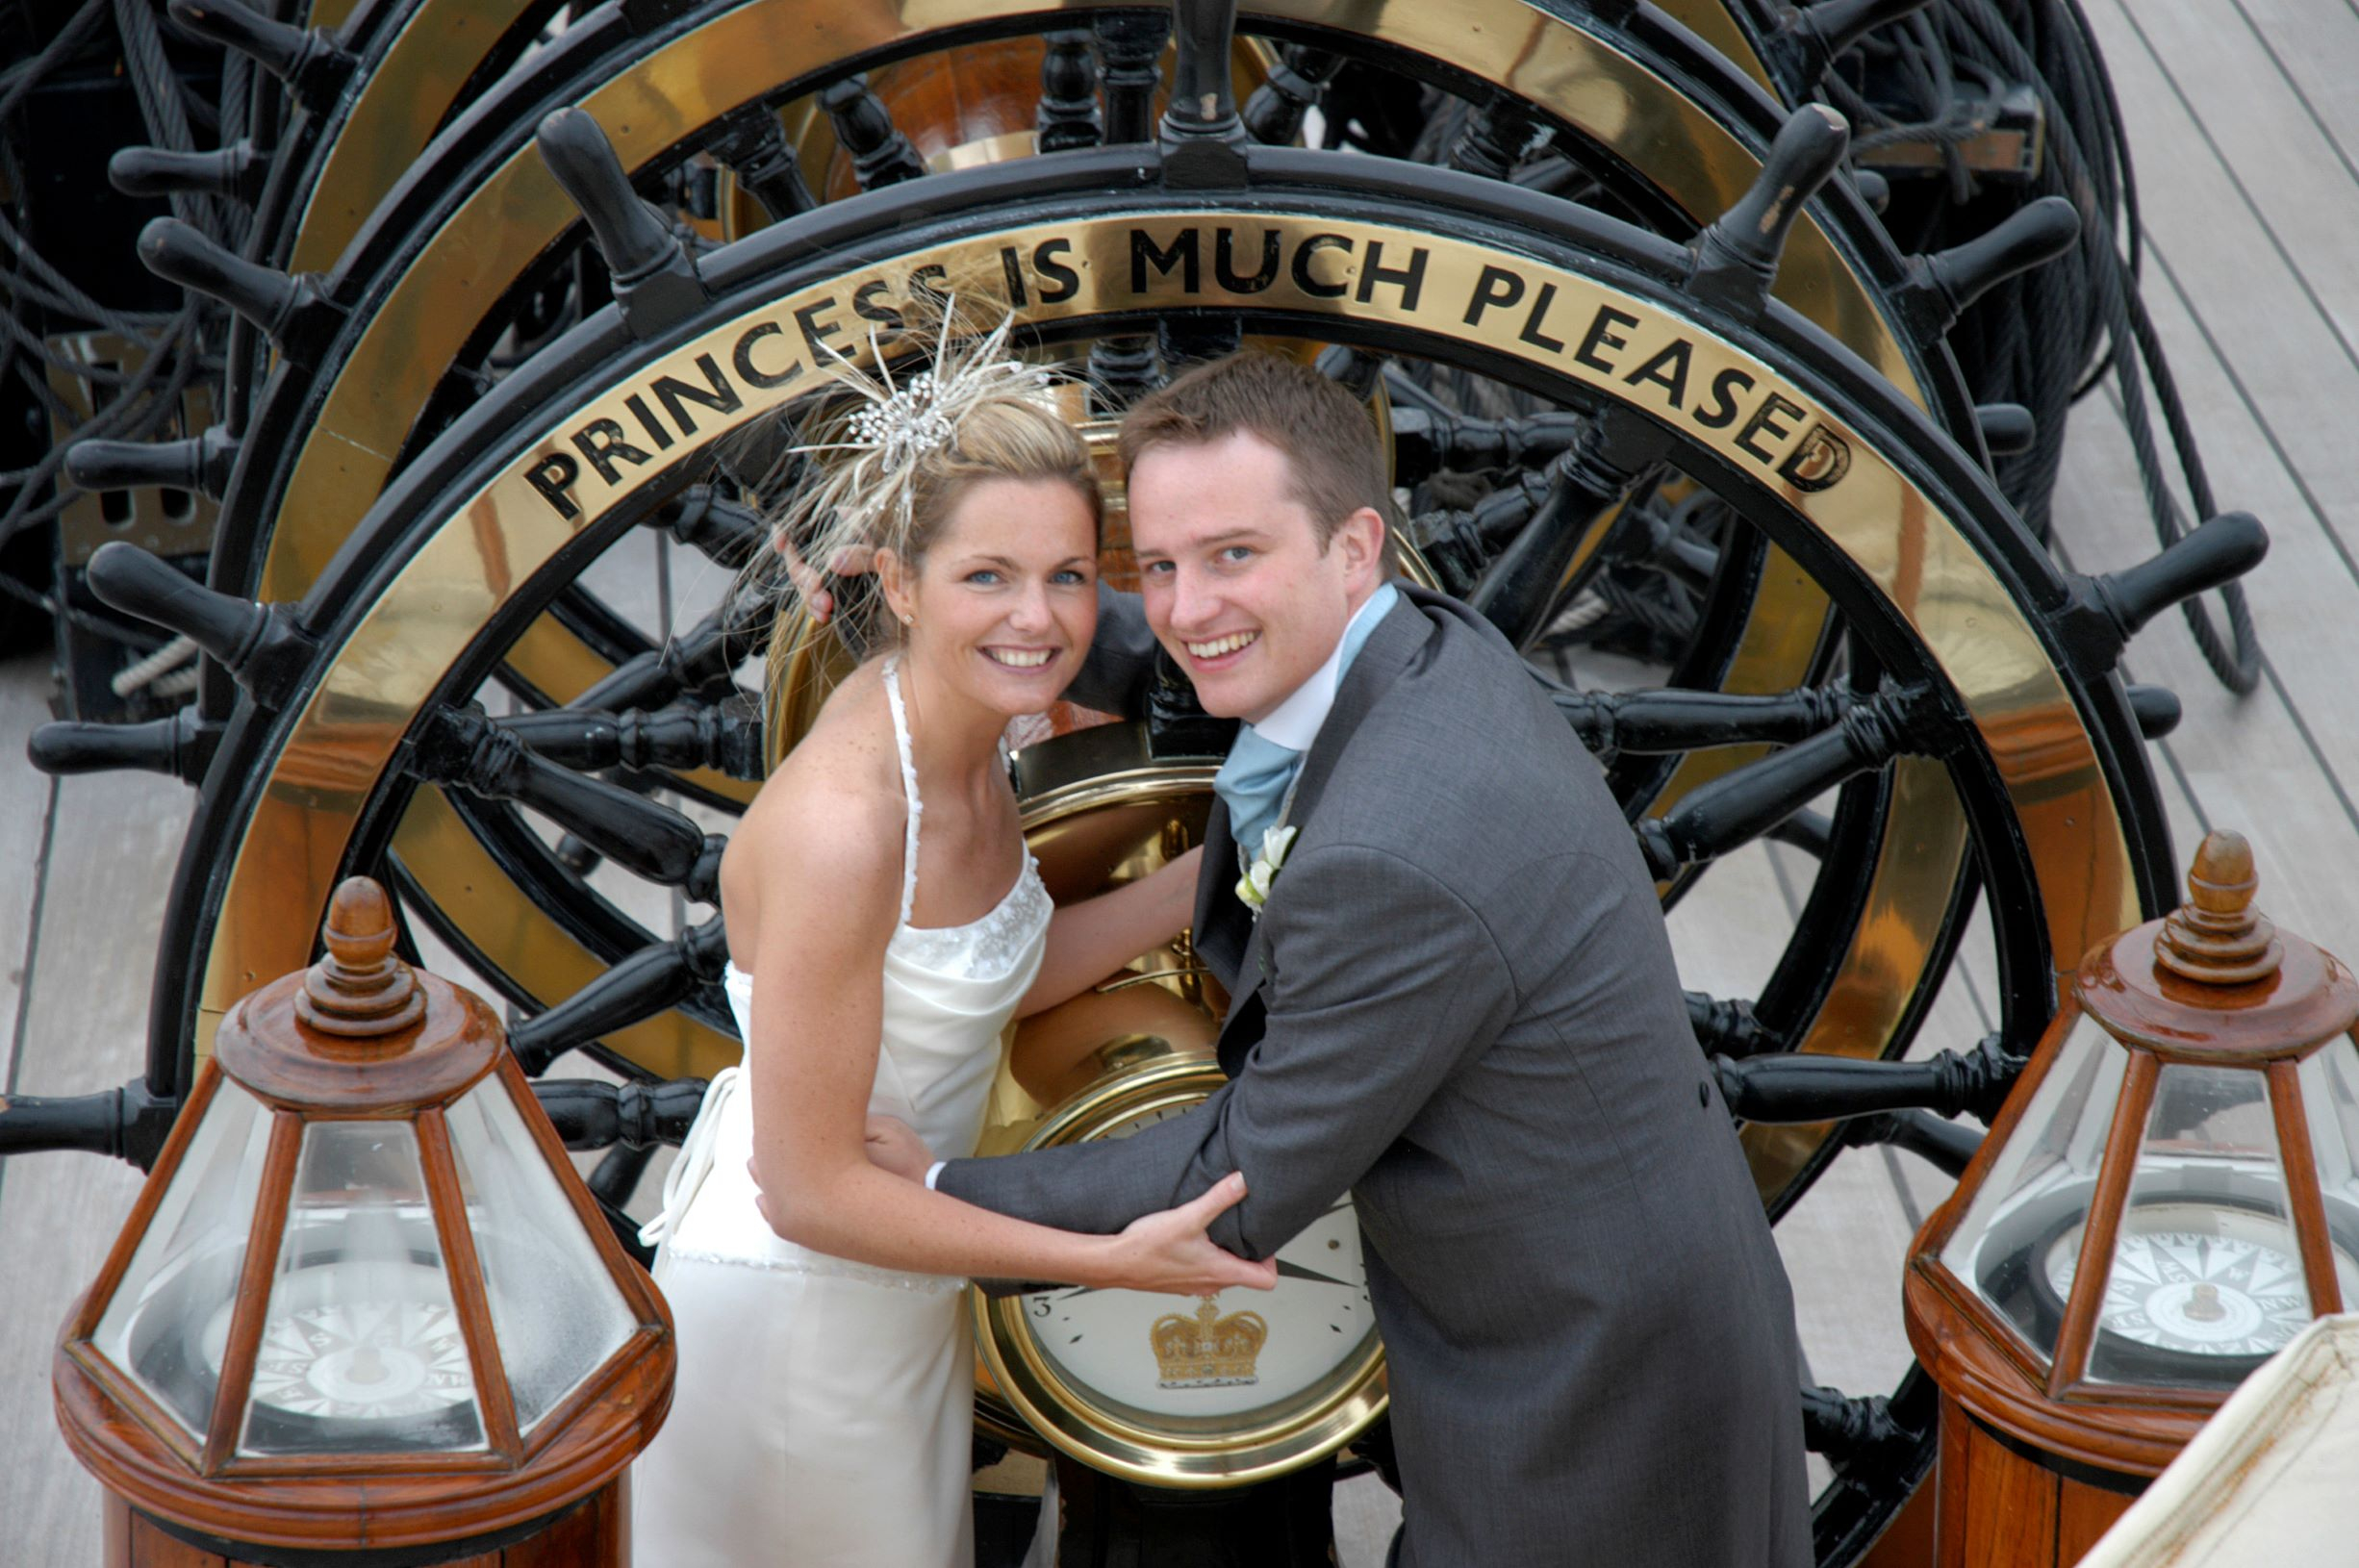 A bride and groom pose for a picture in front of HMS Warrior's ship wheel. The front wheel has a caption engraved on it that says "Princess is much pleased".